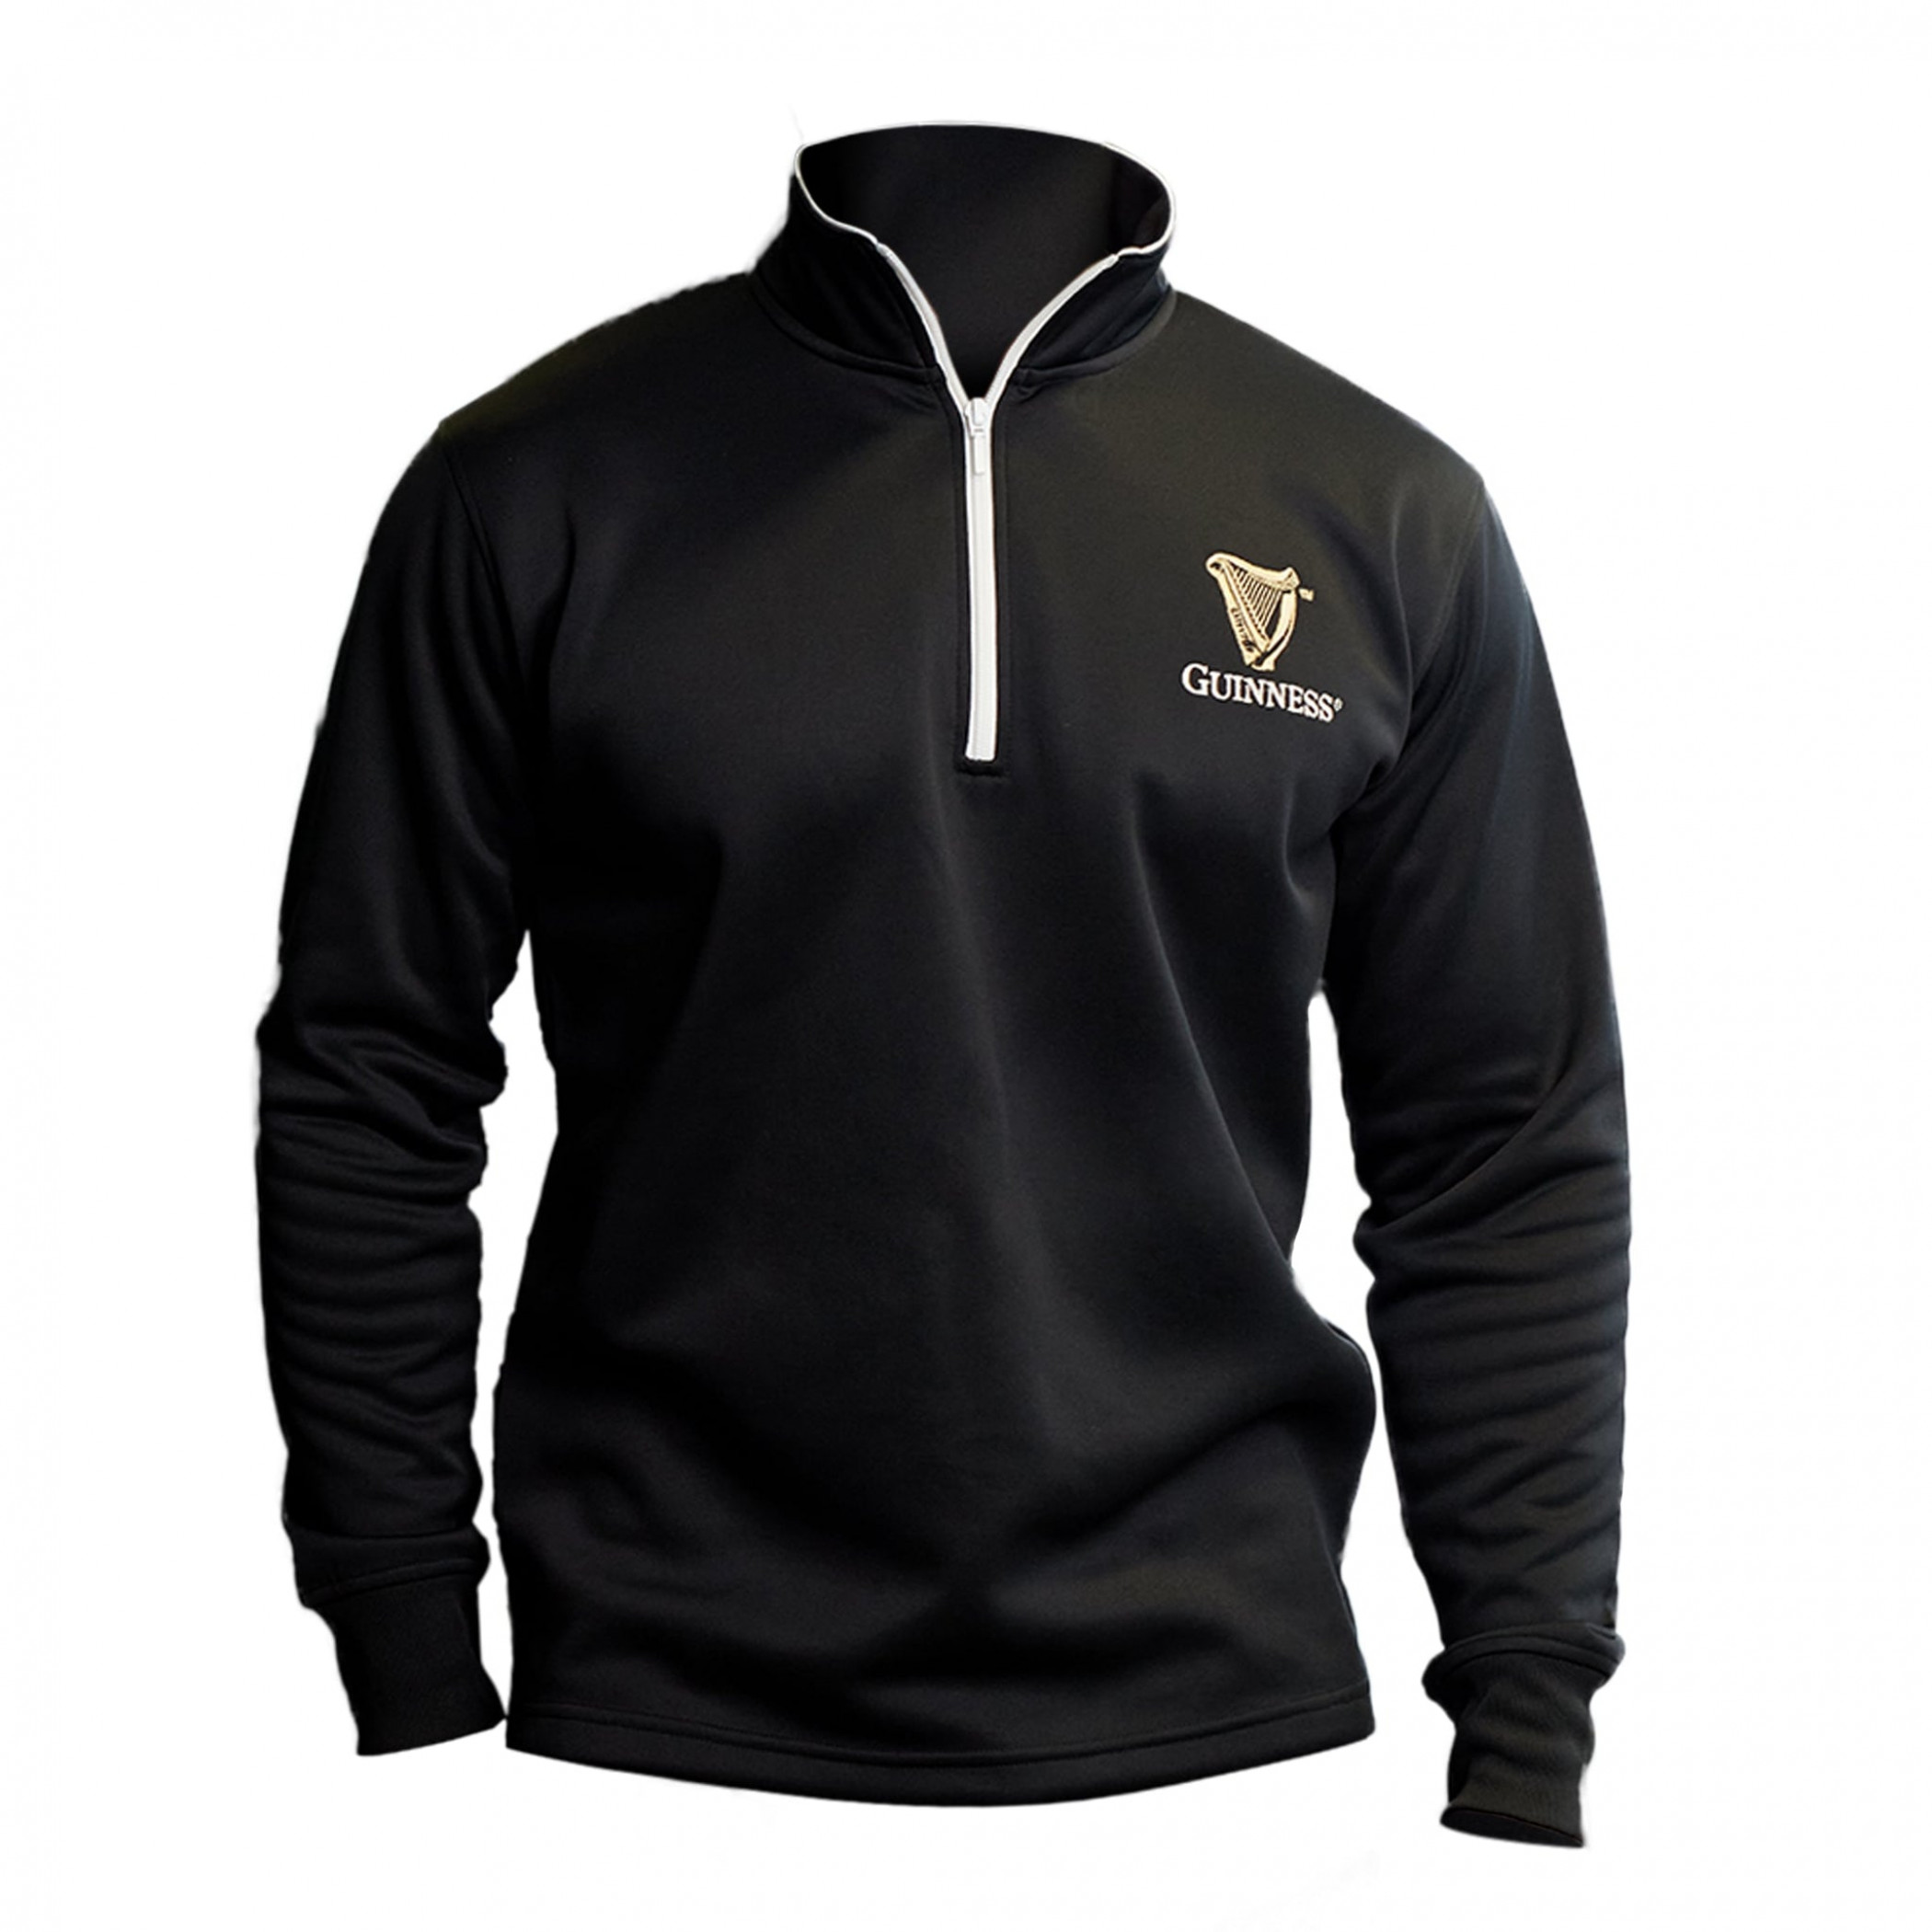 Guinness Harp Logo Recycled Fabric Quarter Zip Performance Top